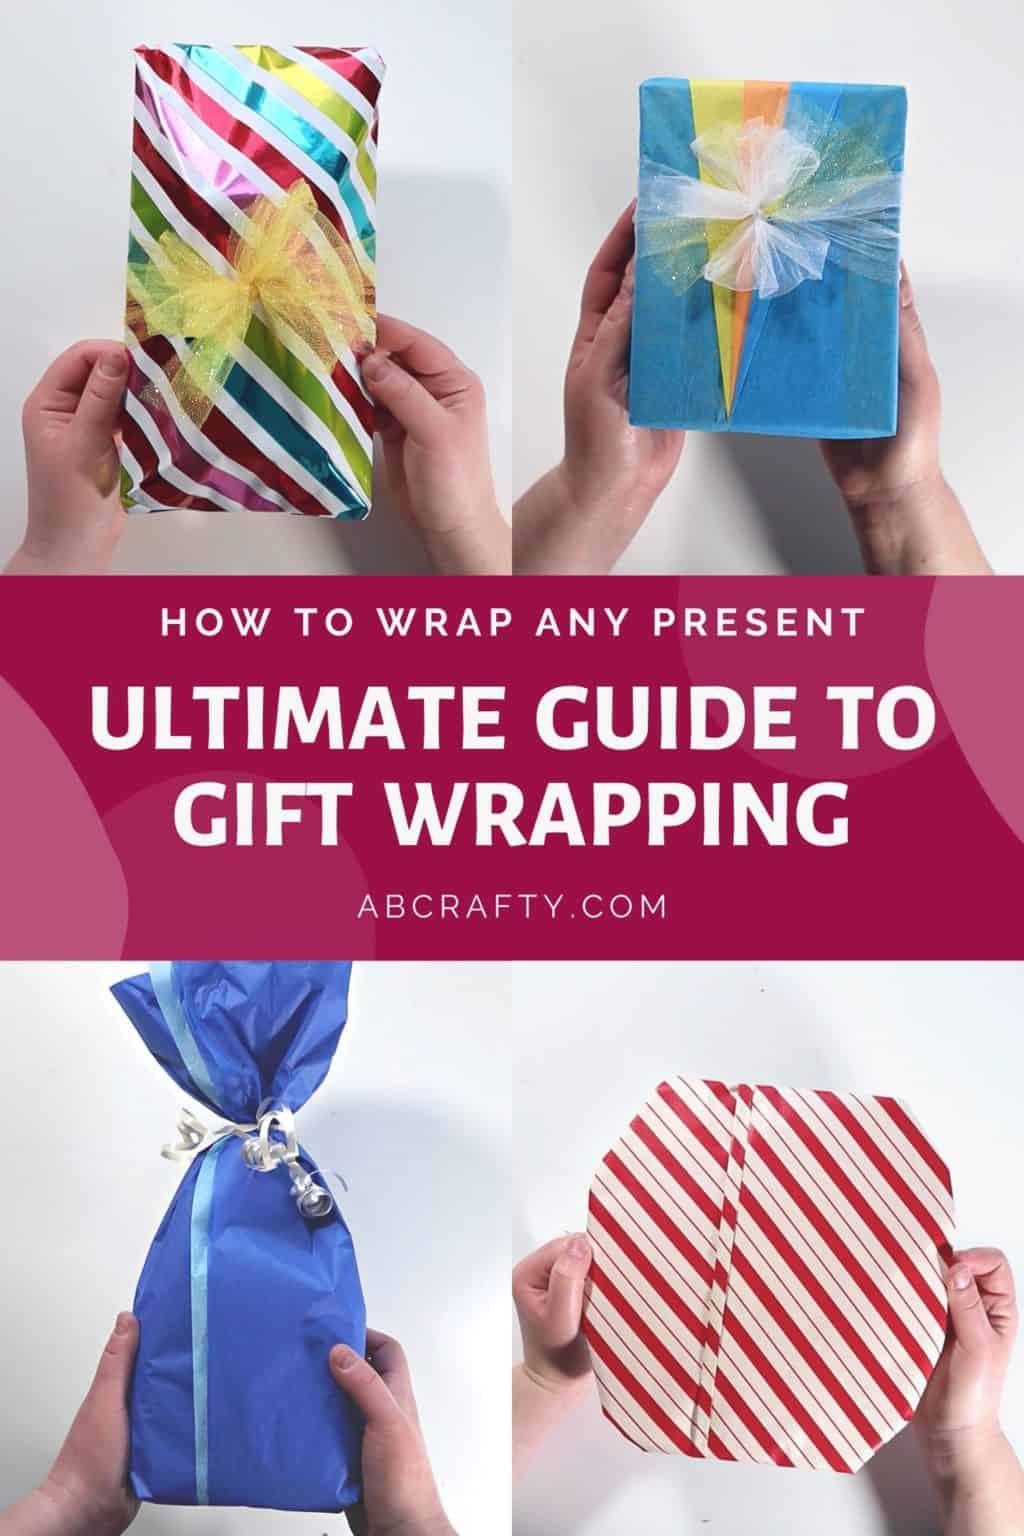 four gift wrapped presents in different styles, some with ribbons and some without and the title reads "how to wrap any present - ultimate guide to gift wrapping"